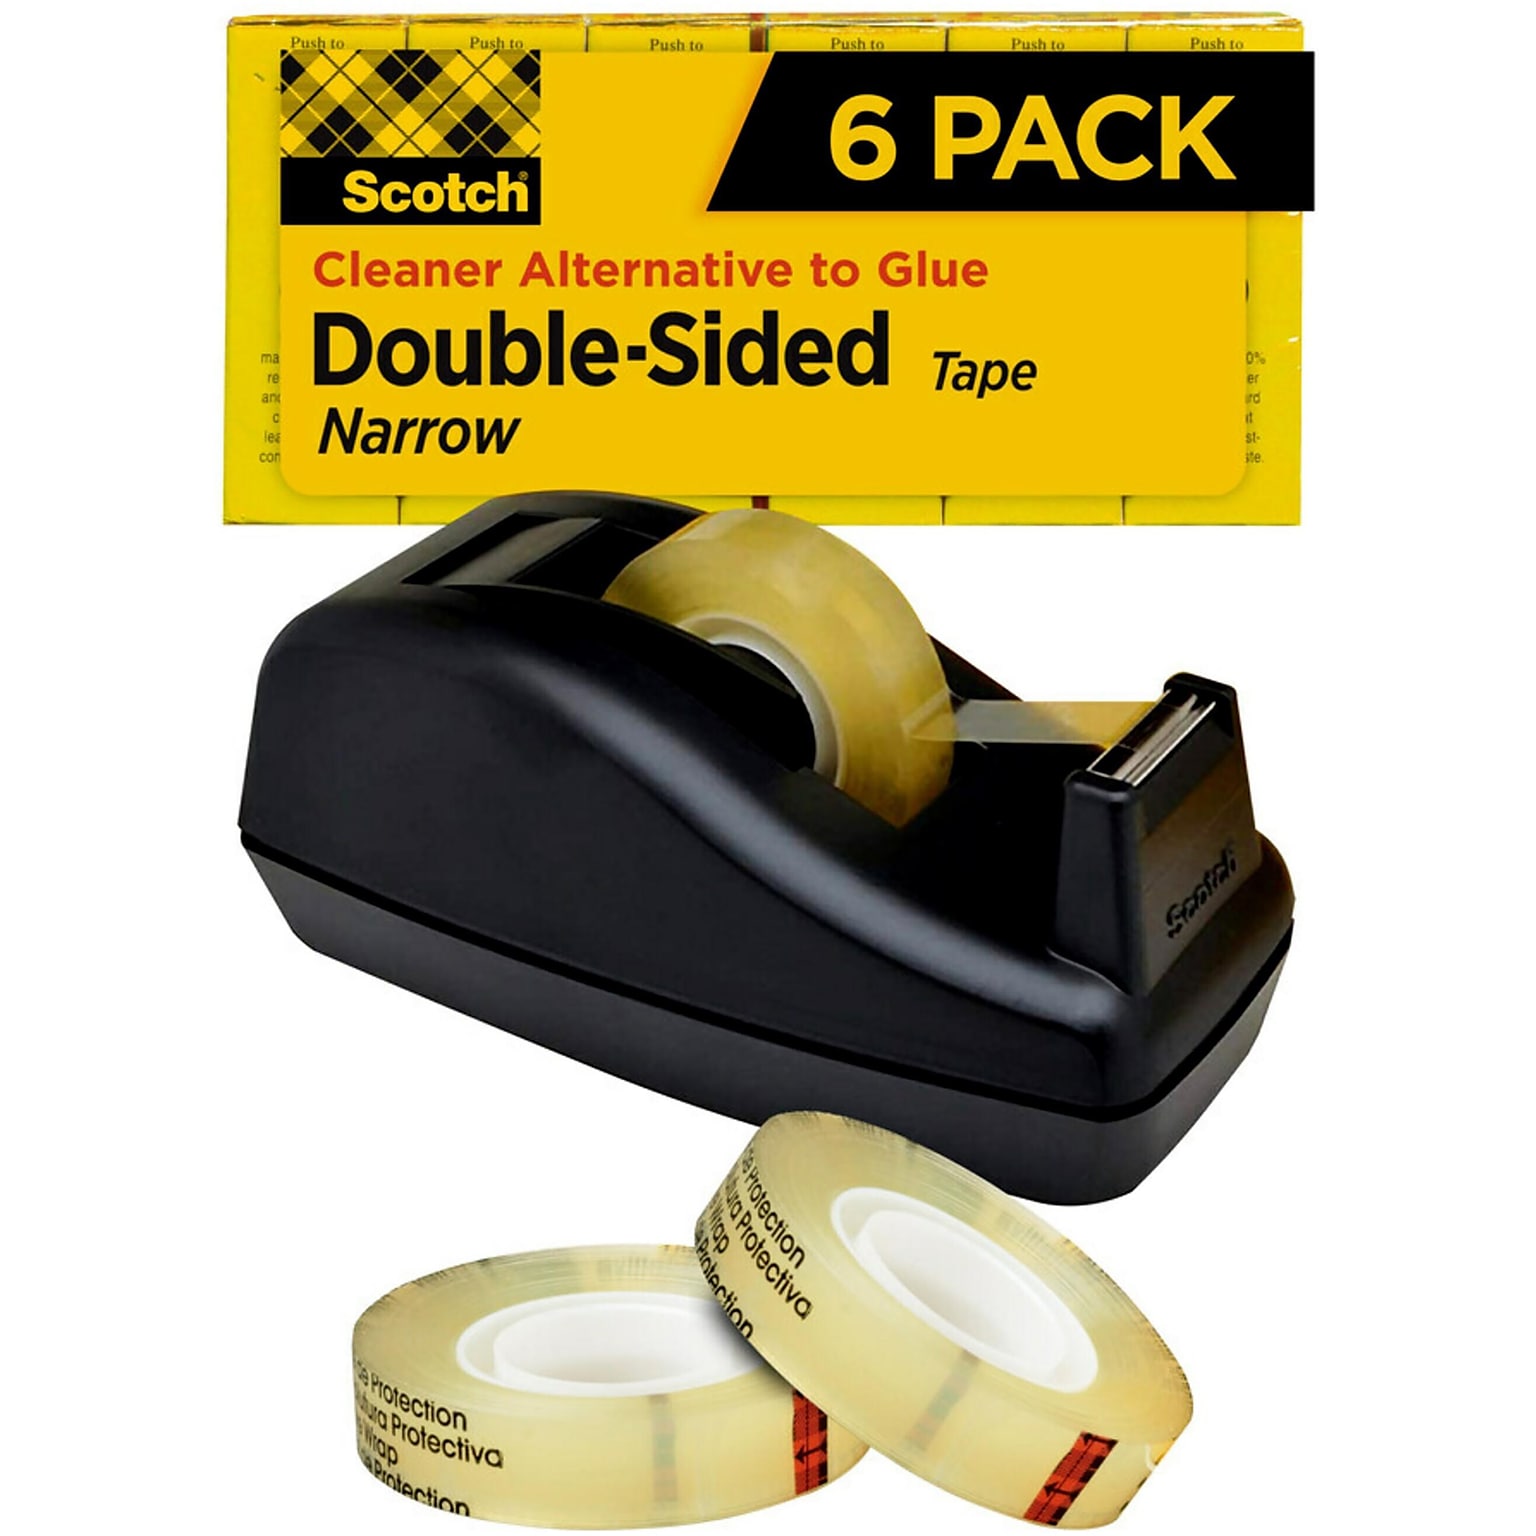 Scotch Permanent Double Sided Tape with Desktop Dispenser, 1/2 in x 900 in, 6 Tape Rolls, Refill, Home Office and Classroom